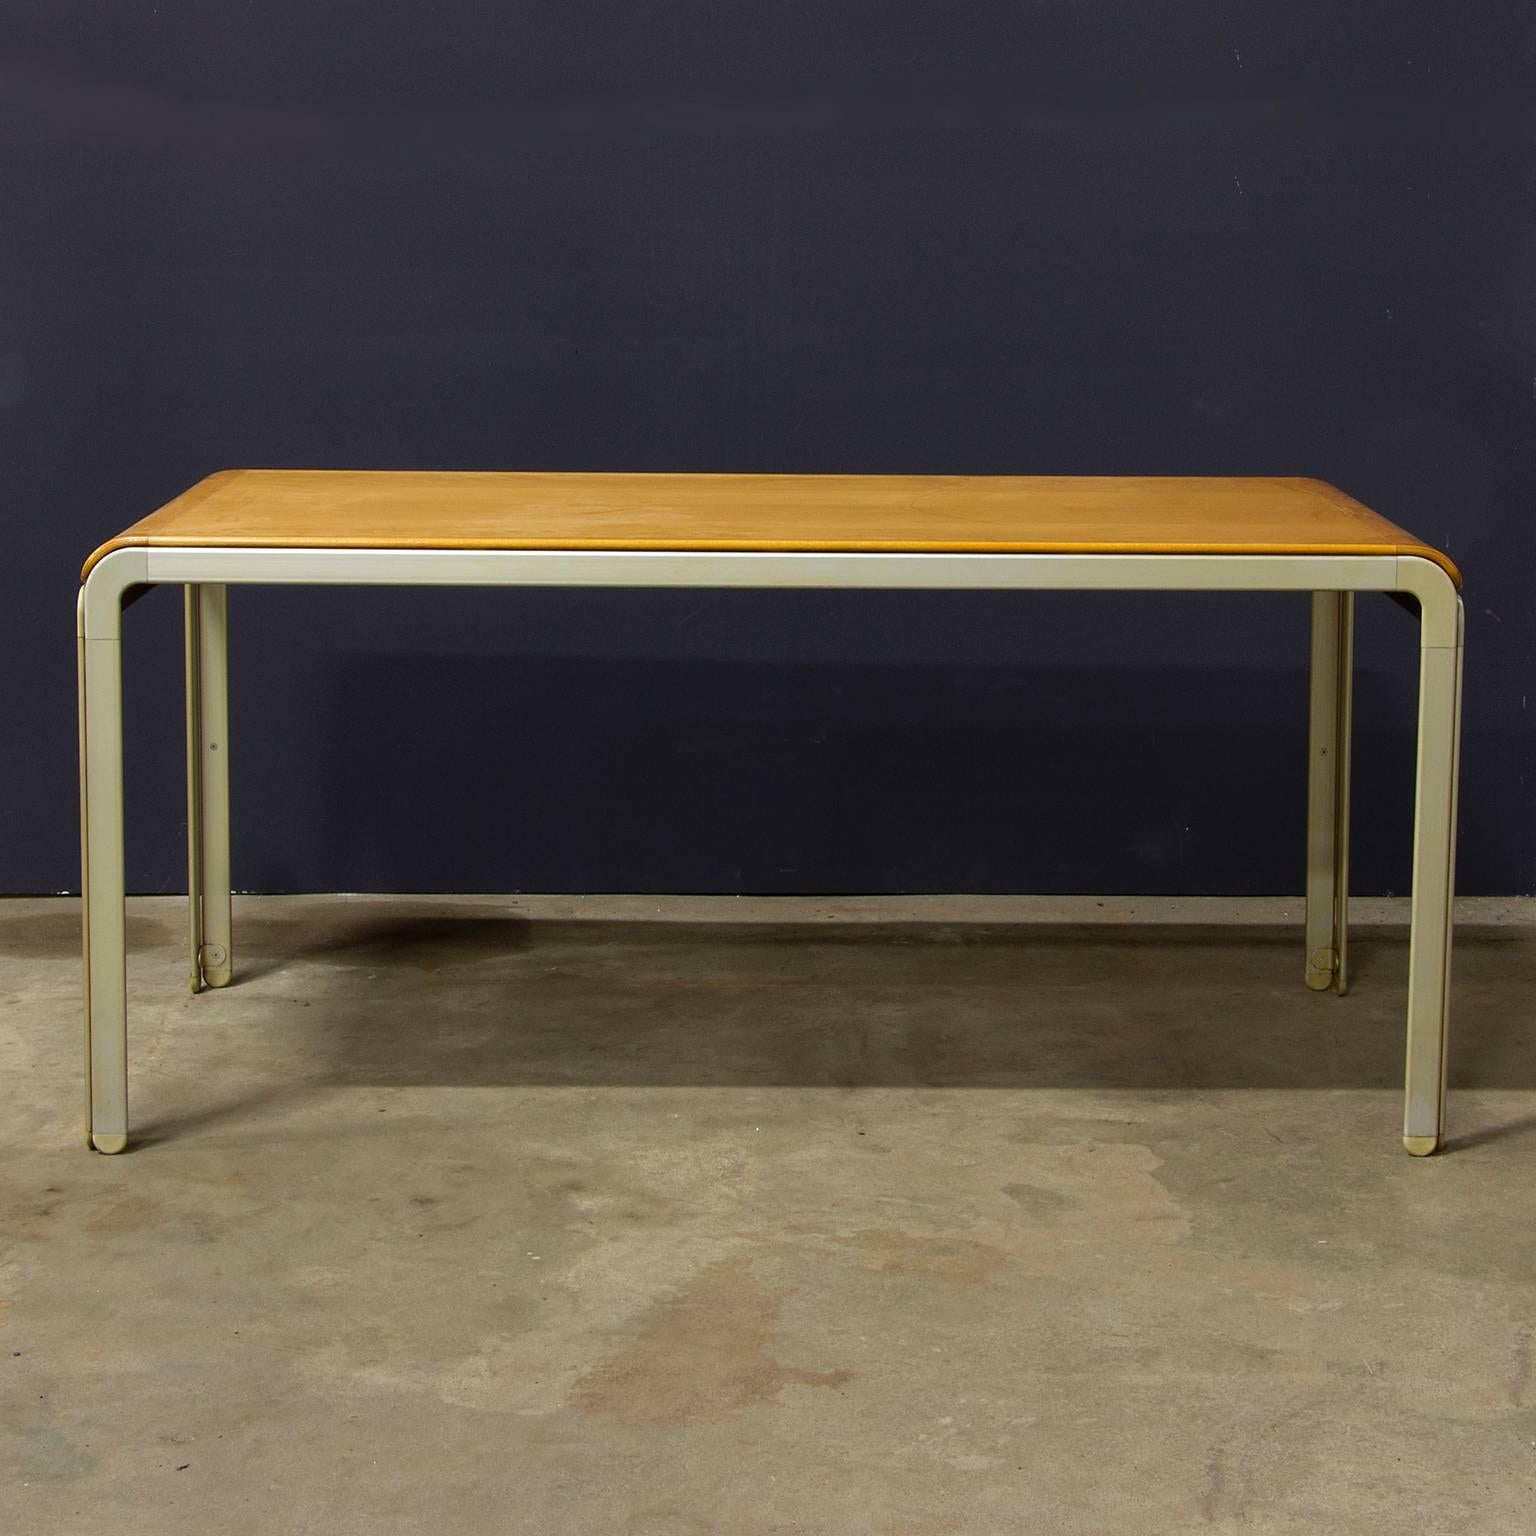 Very rare, to disassemble, aluminium with wooden table by Arne Jacobsen by SOOL Scandinavian Office Organisation Limited dor the Danish National Bank, in very good condition. Measures: 

Weight 25 kg.

Free shipping for Amsterdam, Haarlem and